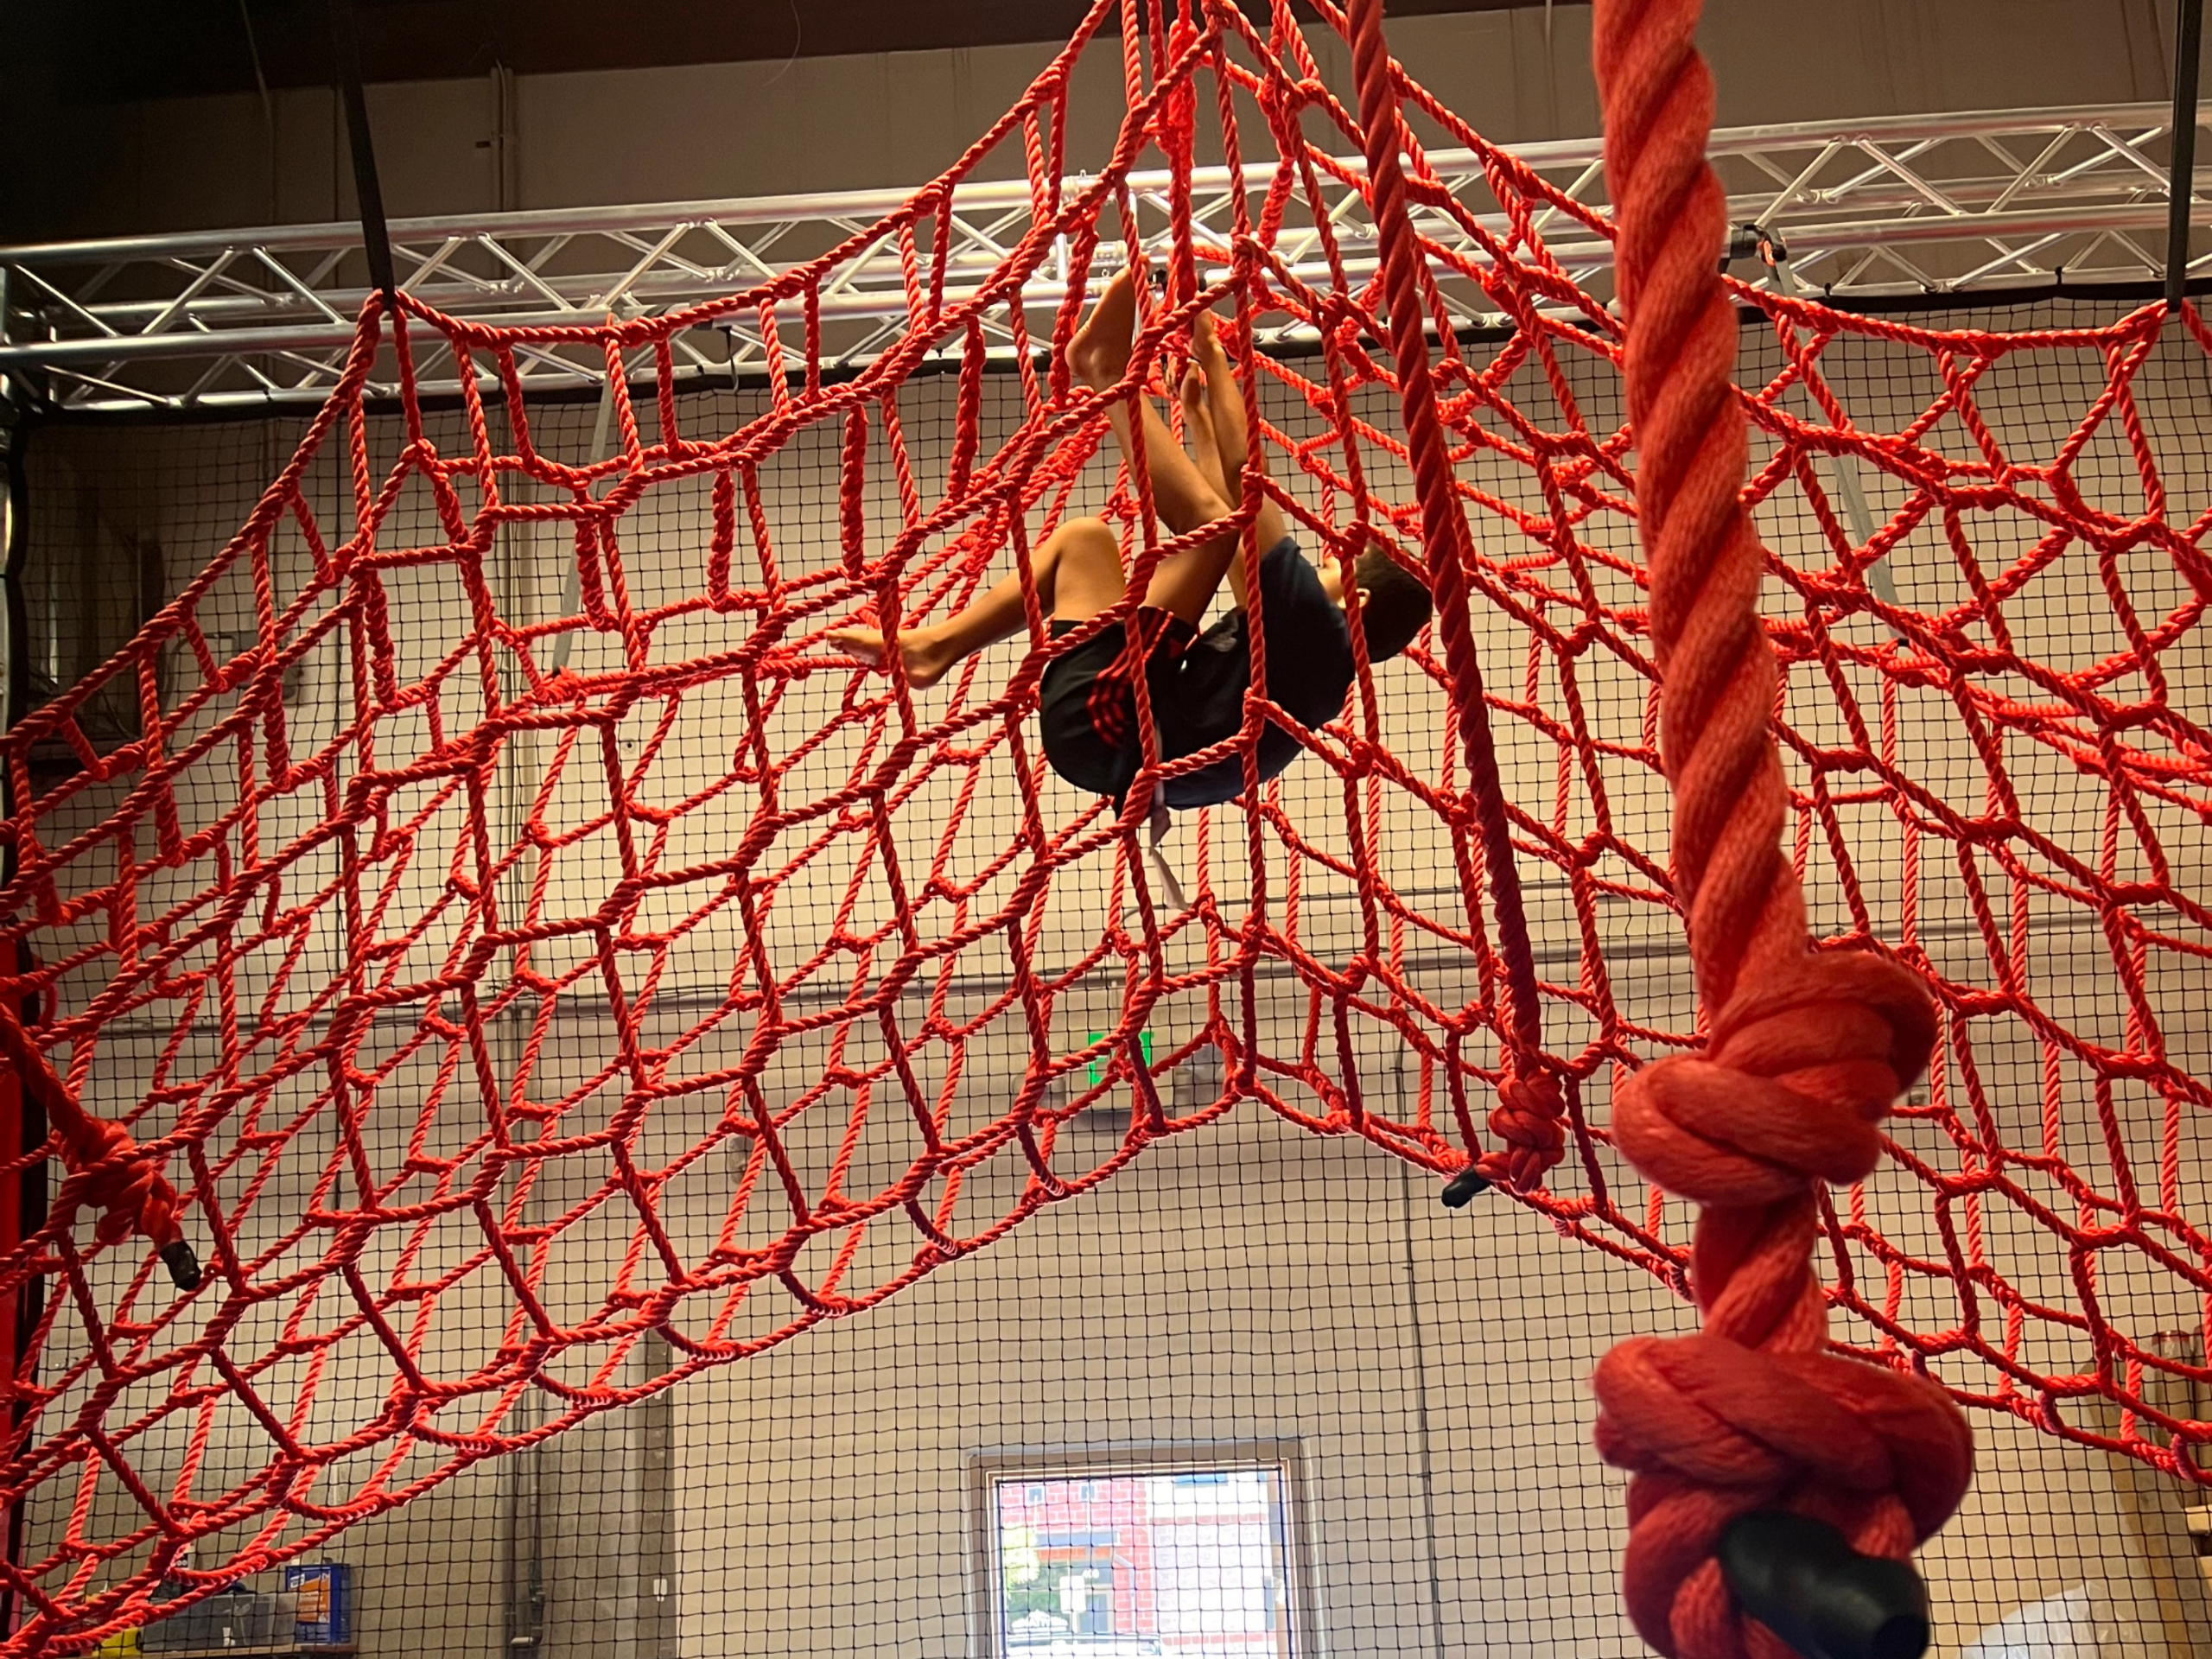 Kid climbing on net in obstacle course